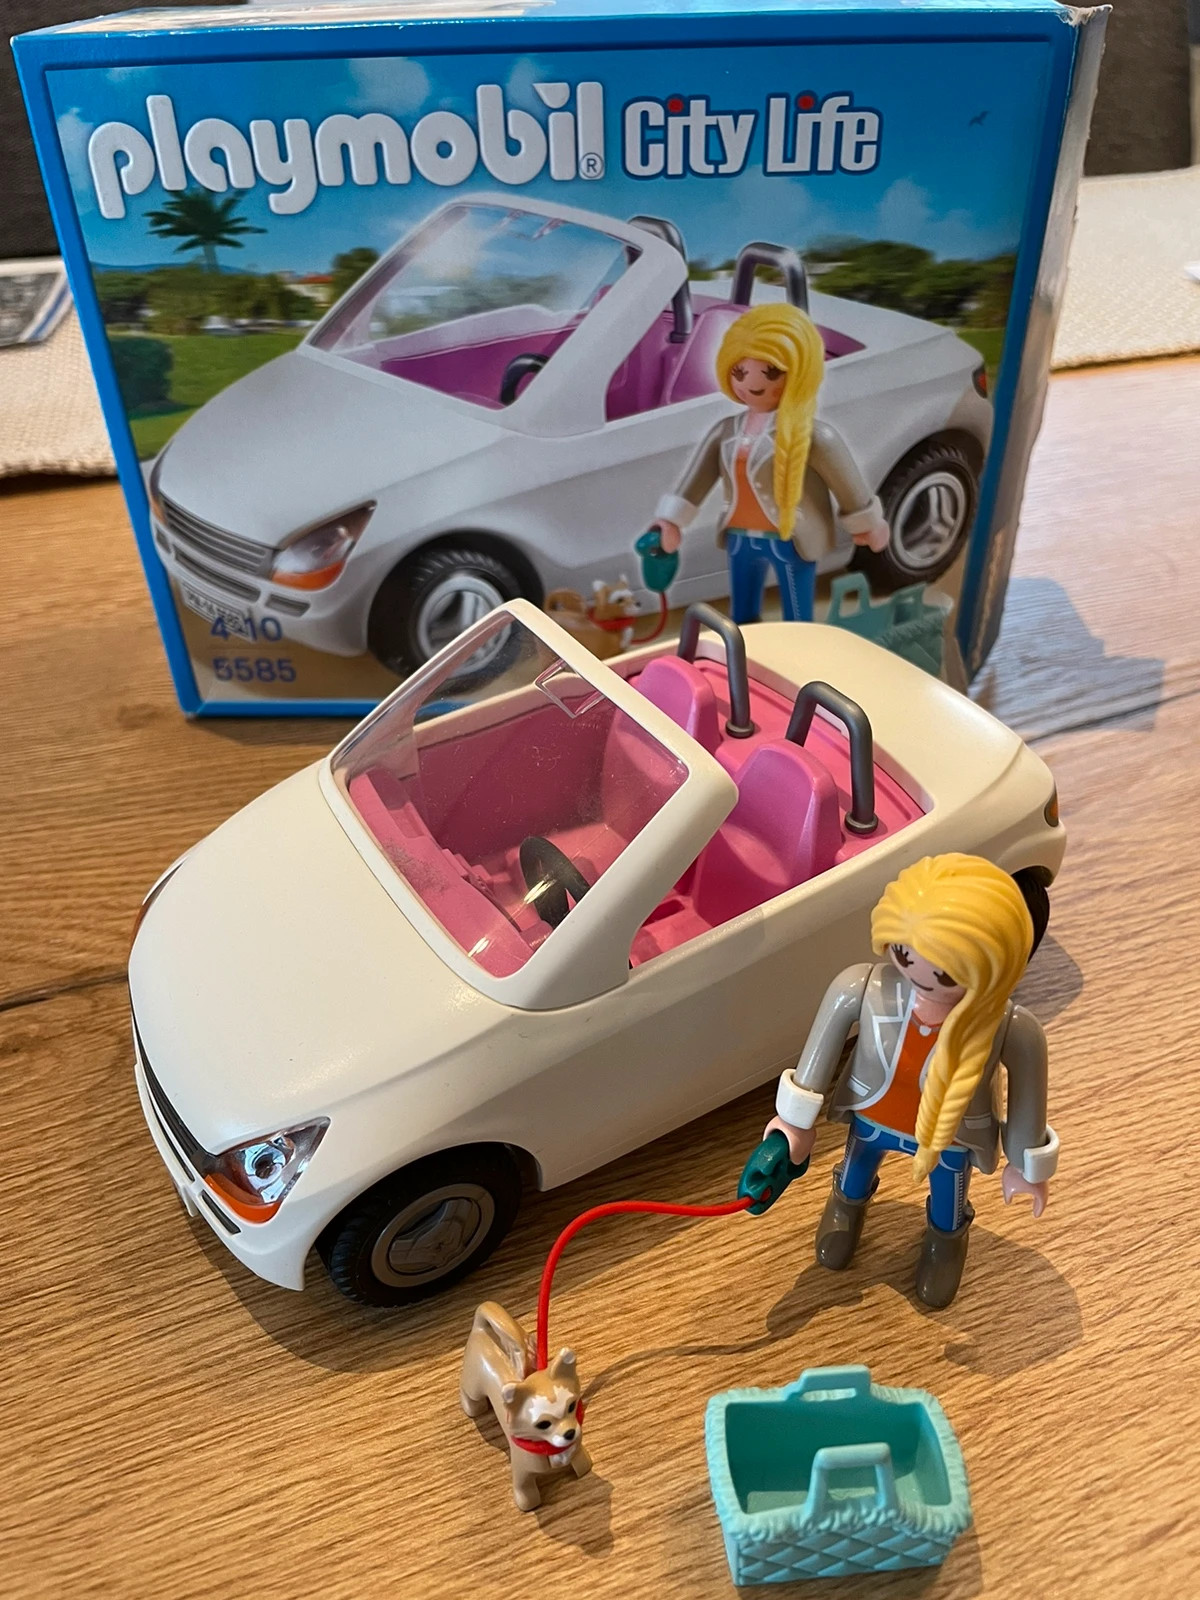 Playmobil City Life 5585 Voiture cabriolet - Playmobil